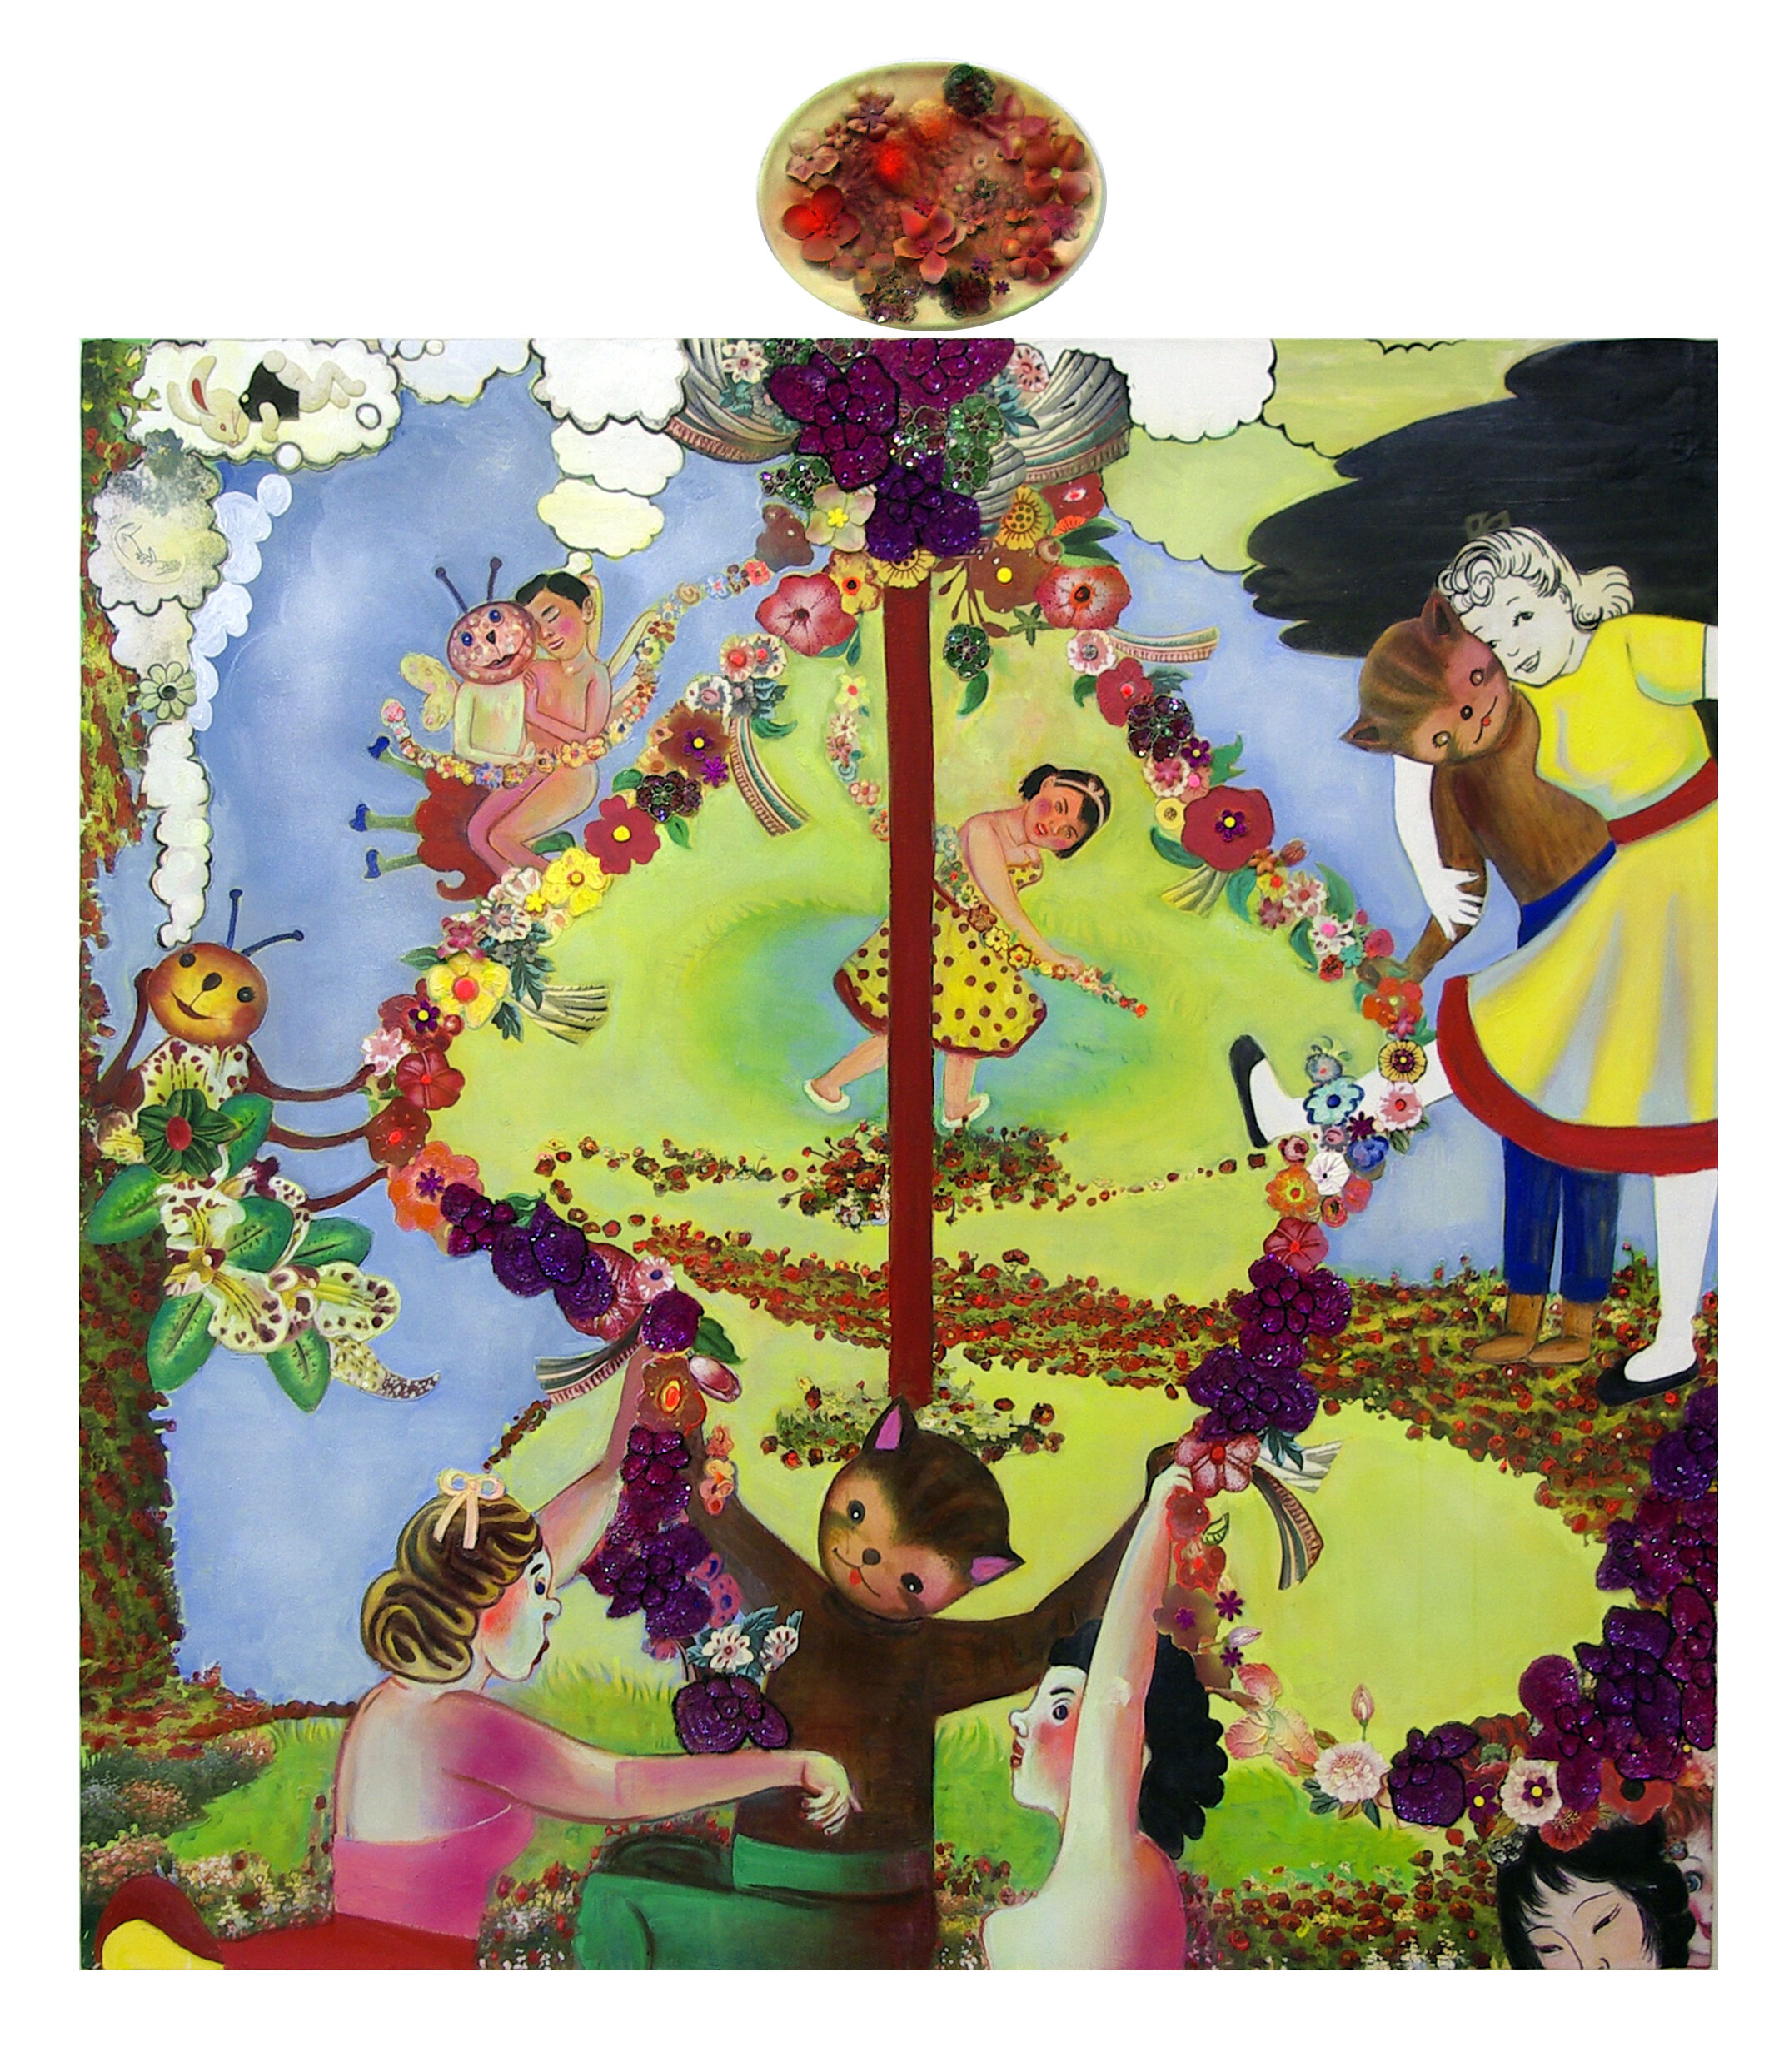 Ring around the Rosie (soon they'll all fall down), 70" × 60", mixed media and collage on canvas, 2008